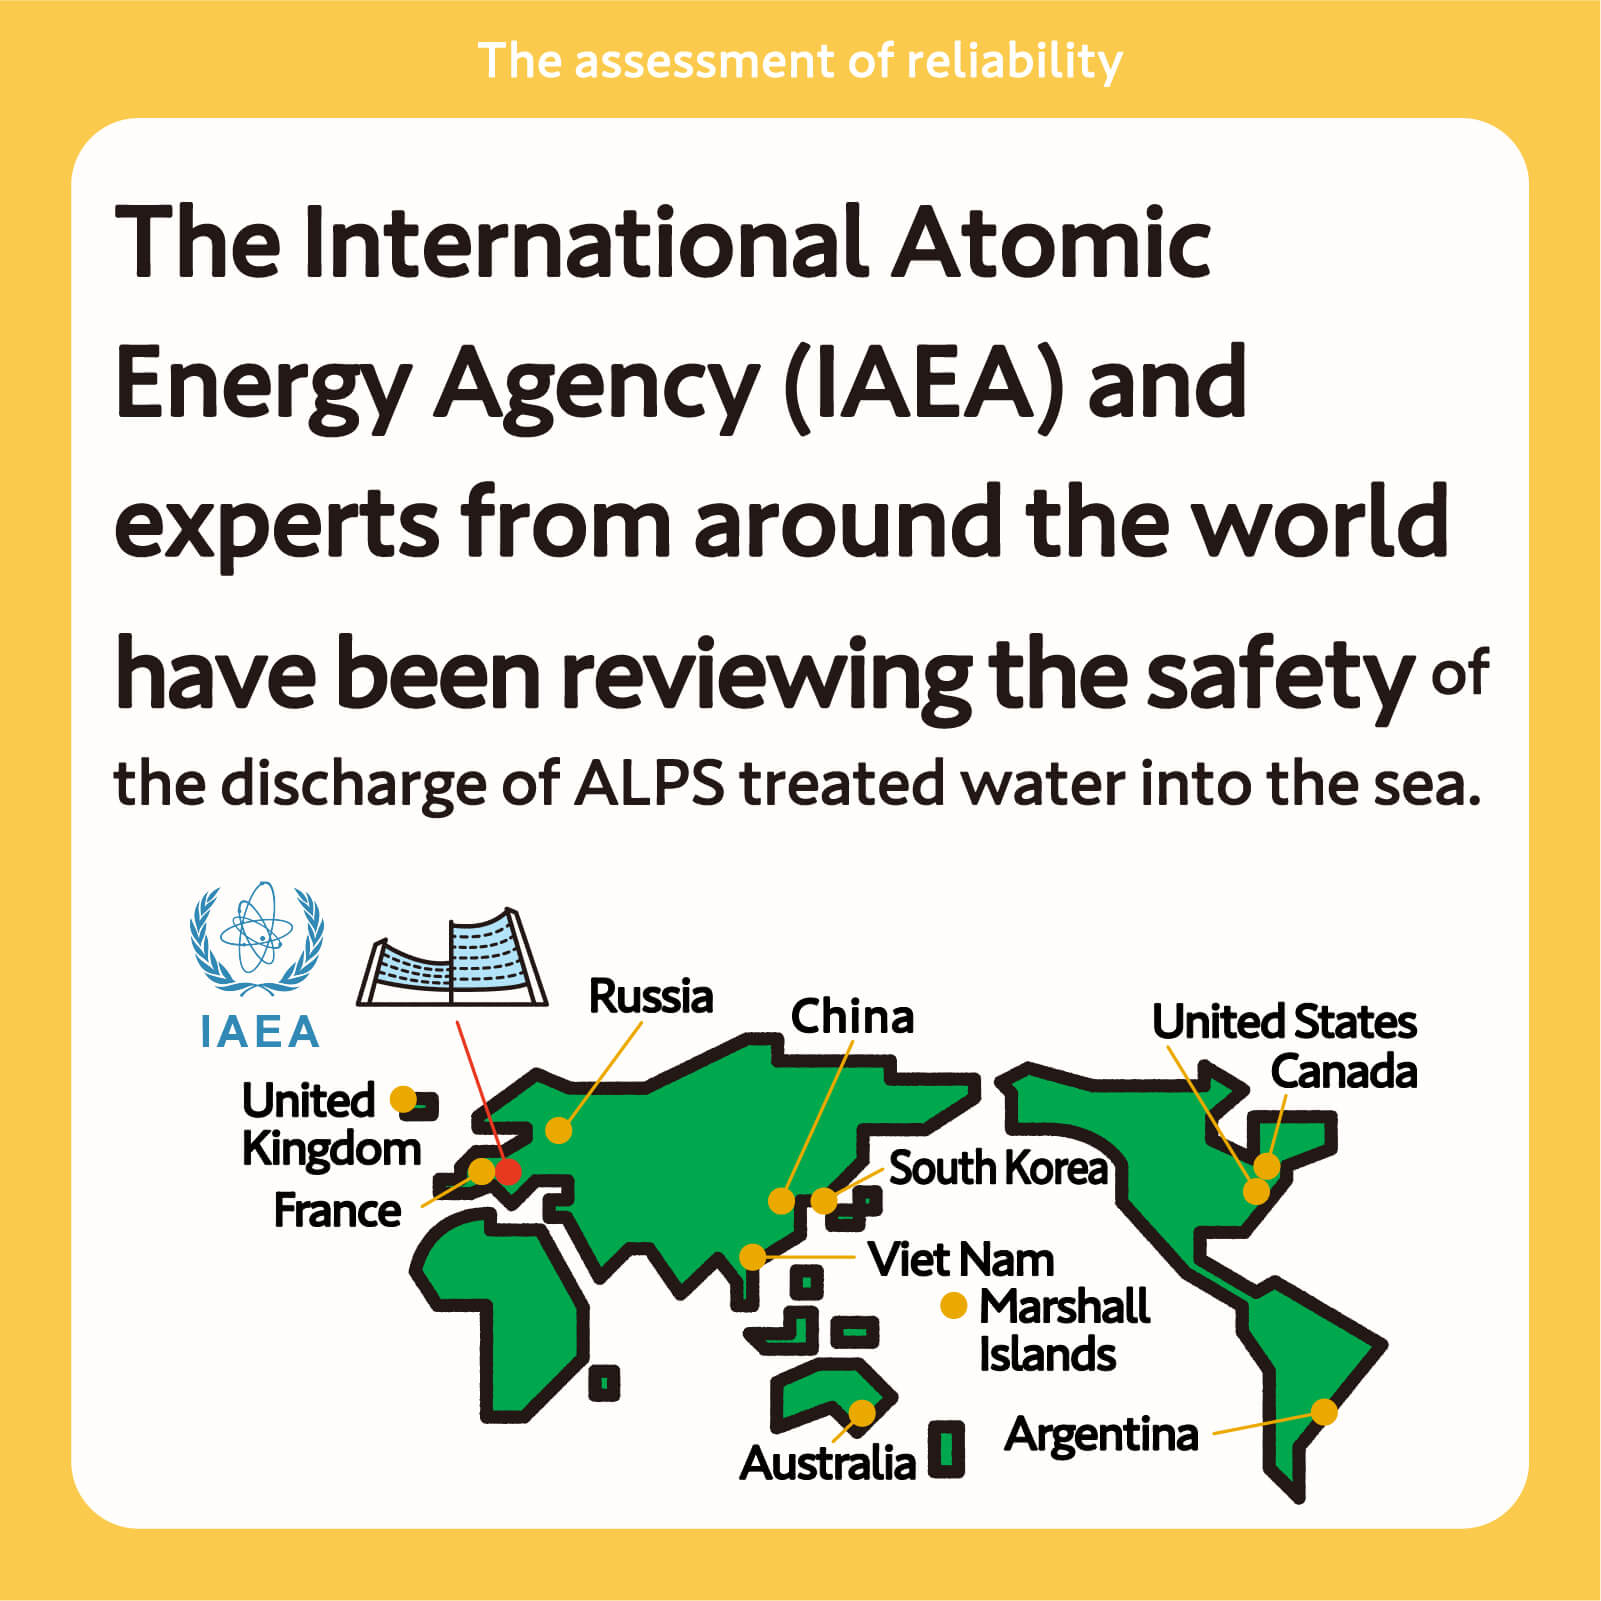 The International Atomic Energy Agency (IAEA) and experts from around the world have been reviewing the safety of the discharge of ALPS treated water into the sea.